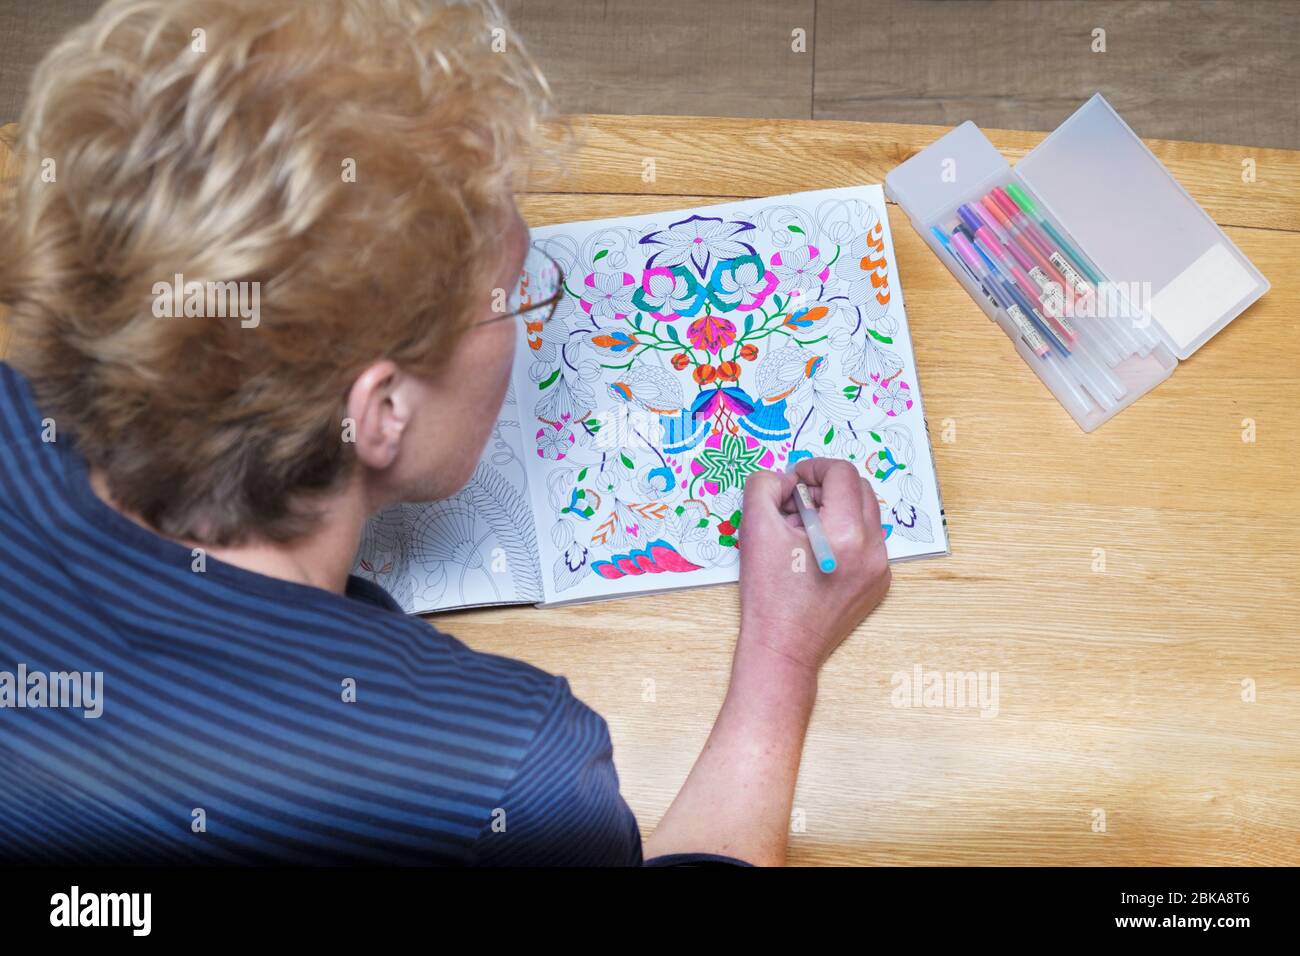 A mature middle aged woman colouring in an adult colouring book. A de stressing, calming, mindfulness activity. Patterns are coloured with bright pens Stock Photo